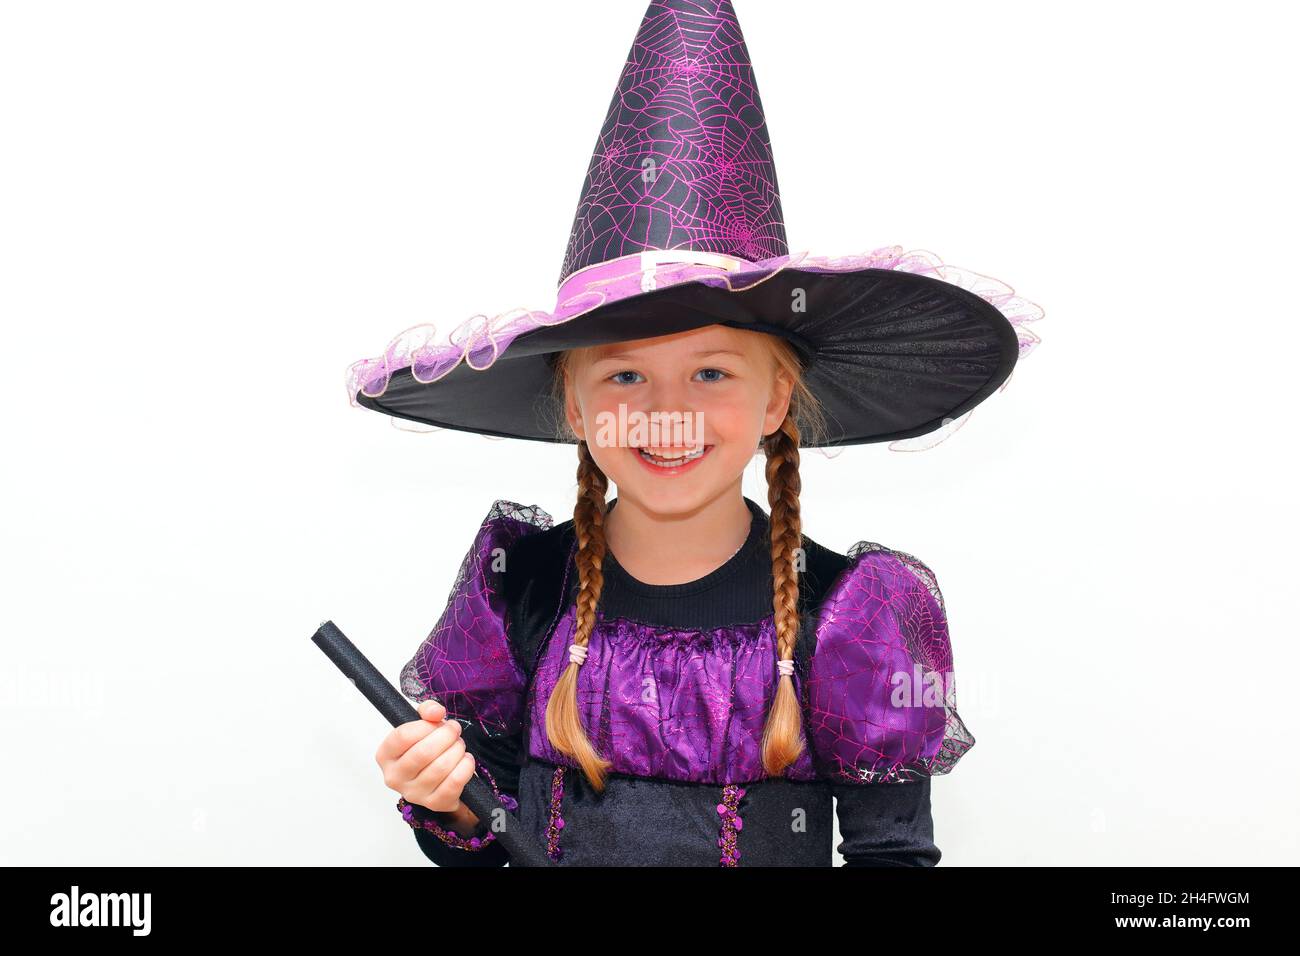 A 6 year old girl in a Witches halloween costume Stock Photo